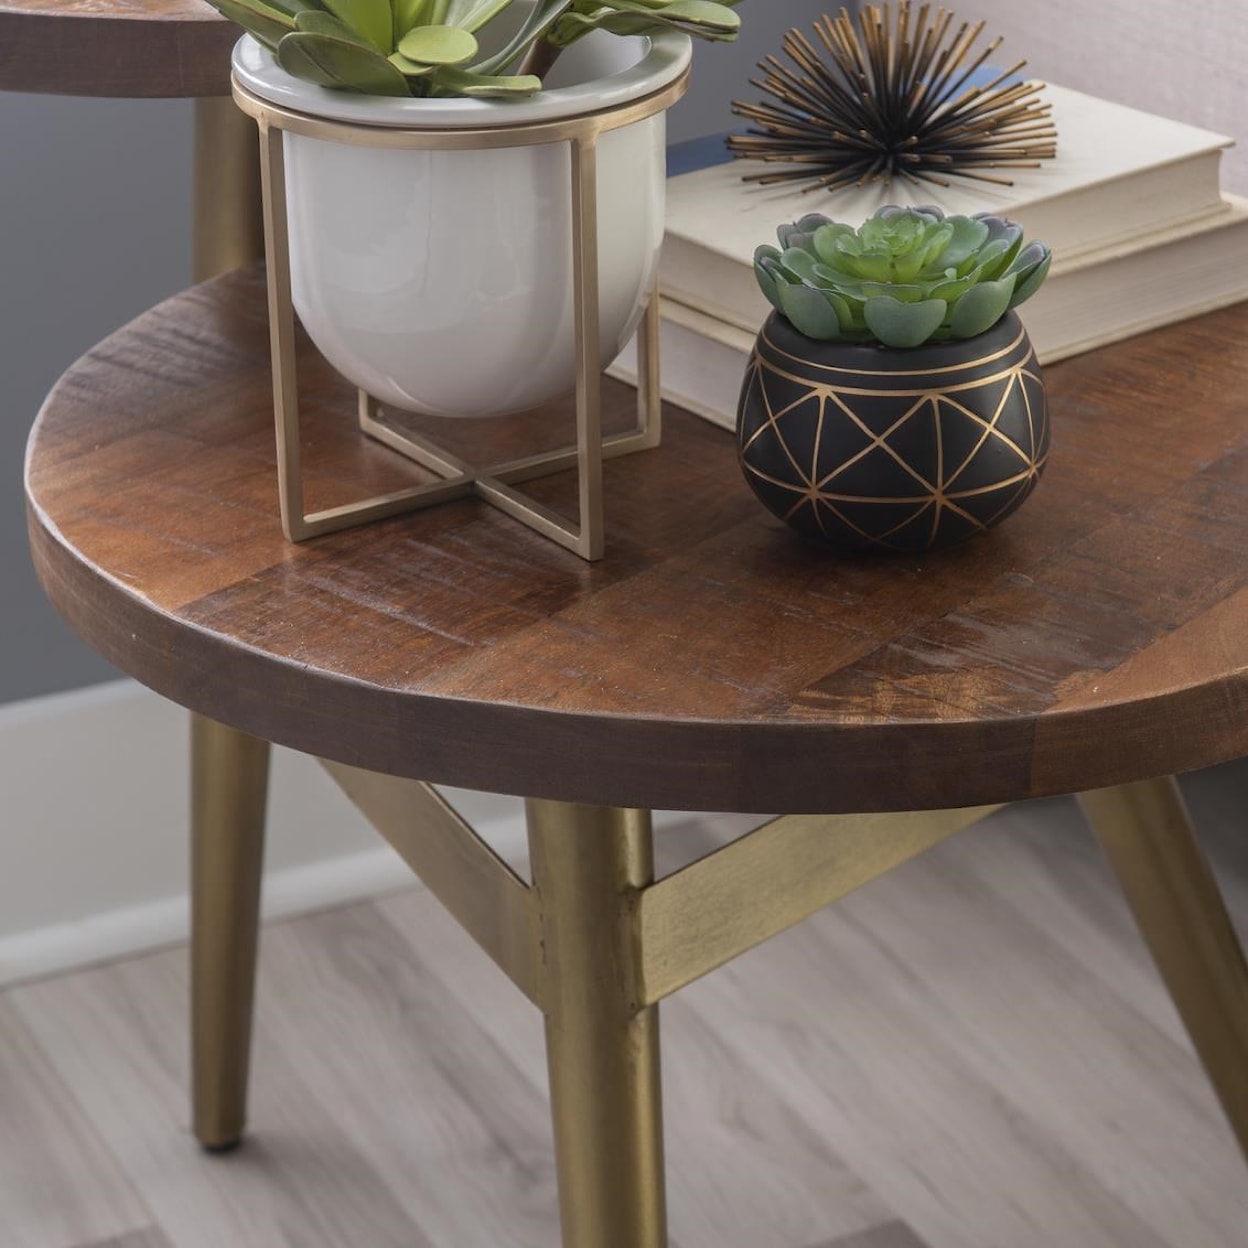 LaHave Furniture Denman Two-Tiered Side Table